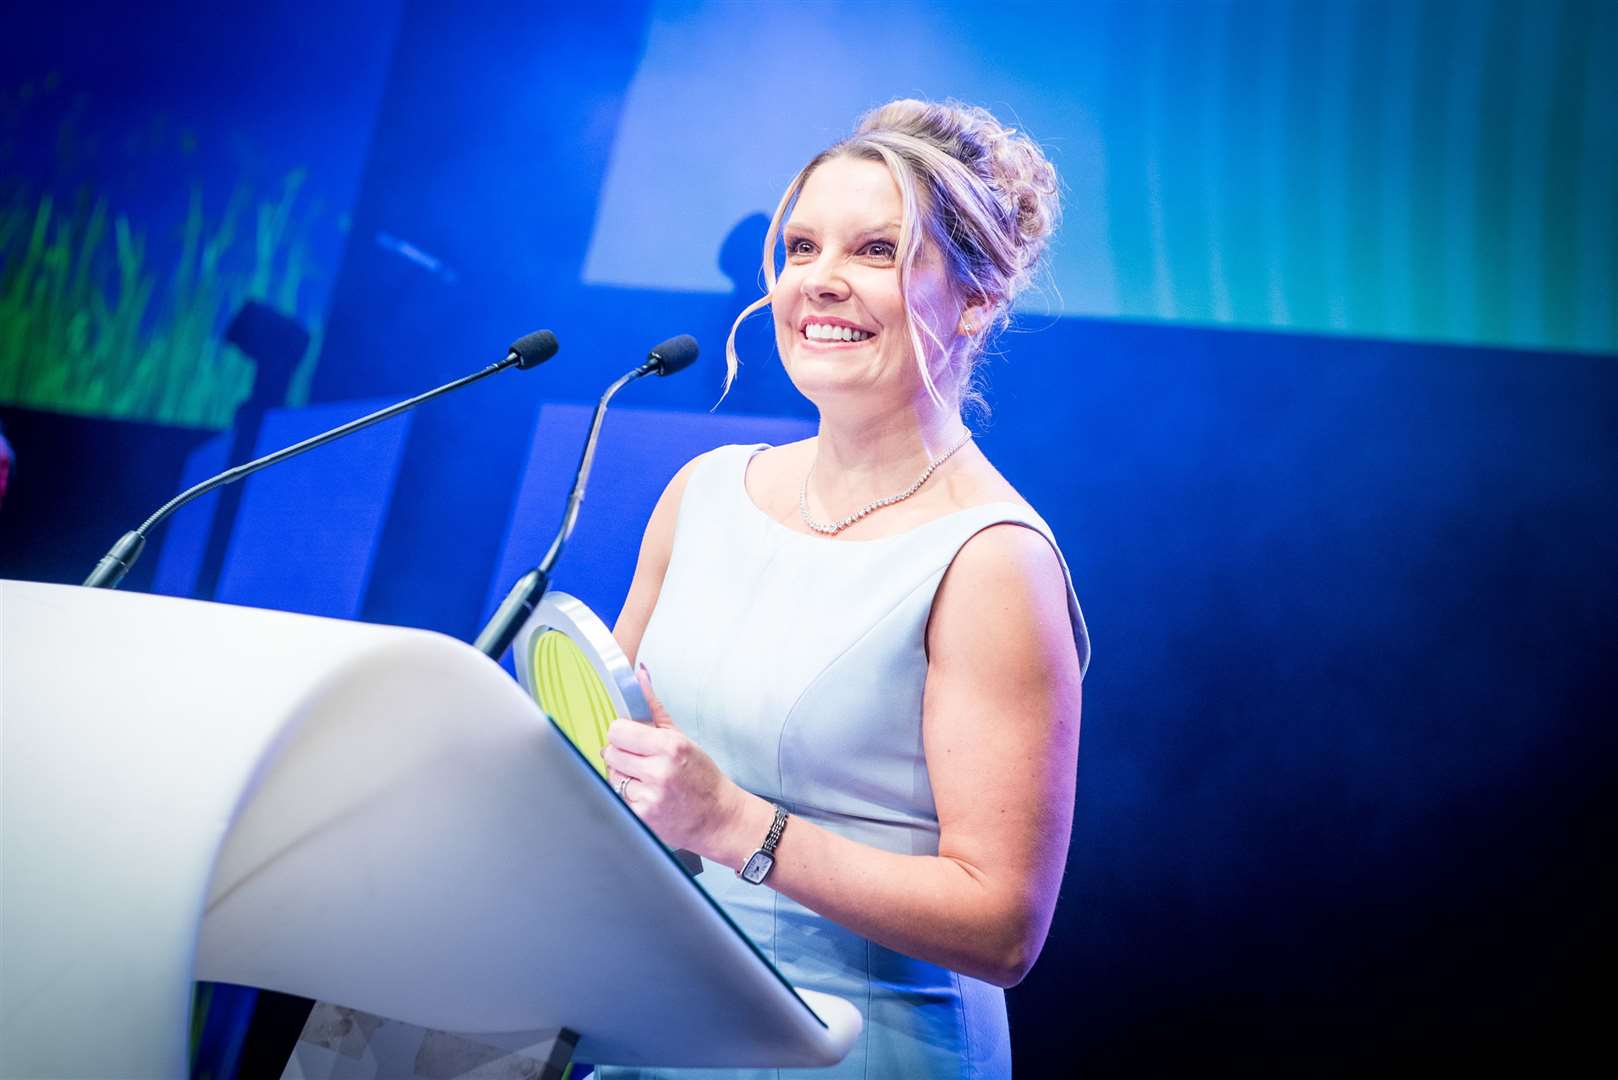 Claire Mack, chief executive of Scottish Renewables, said the Scottish Green Energy Awards showcase the innovation, drive and passion of those working in the industry.